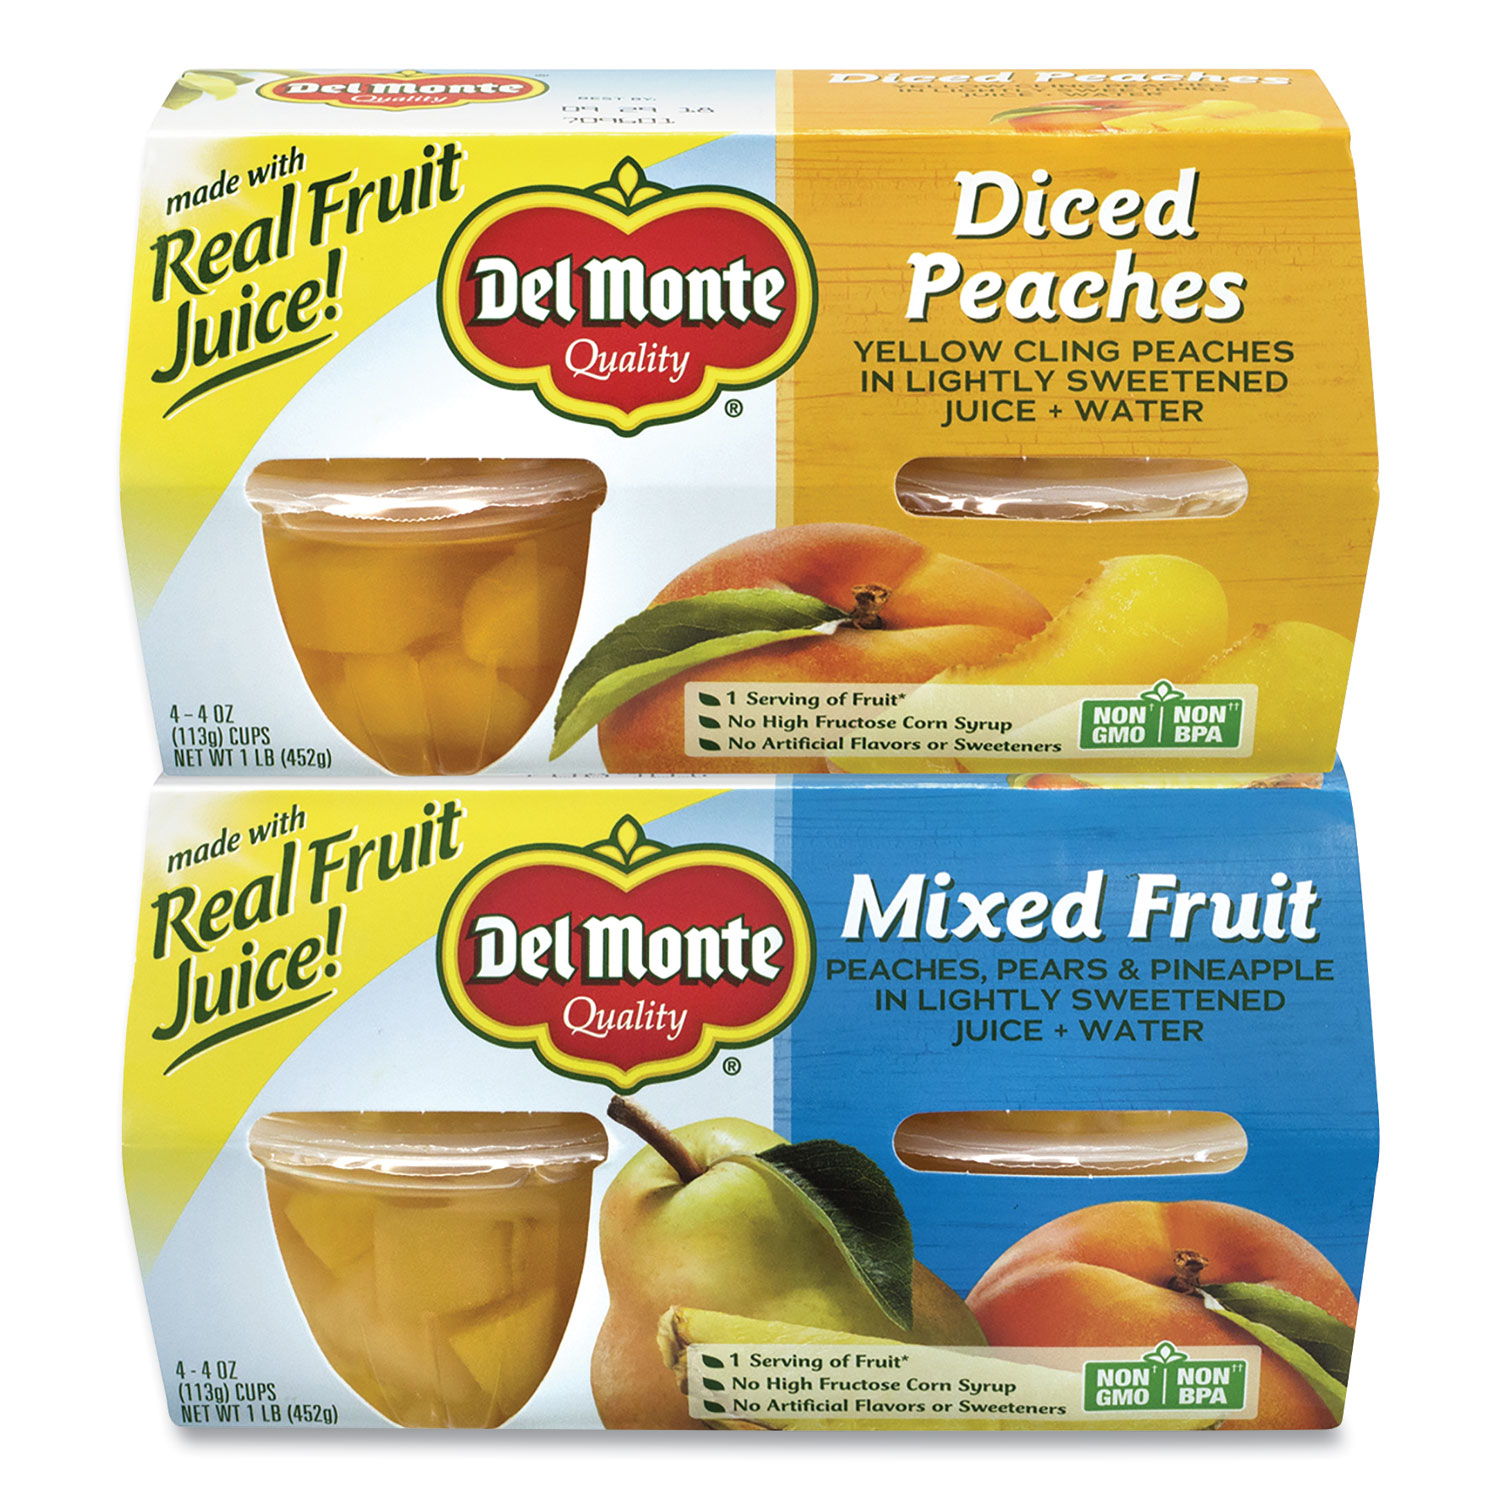 Del Monte® Diced Peaches and Mixed Fruit Cups, 4 oz Cups, 16 Cups/Box, Free Delivery in 1-4 Business Days